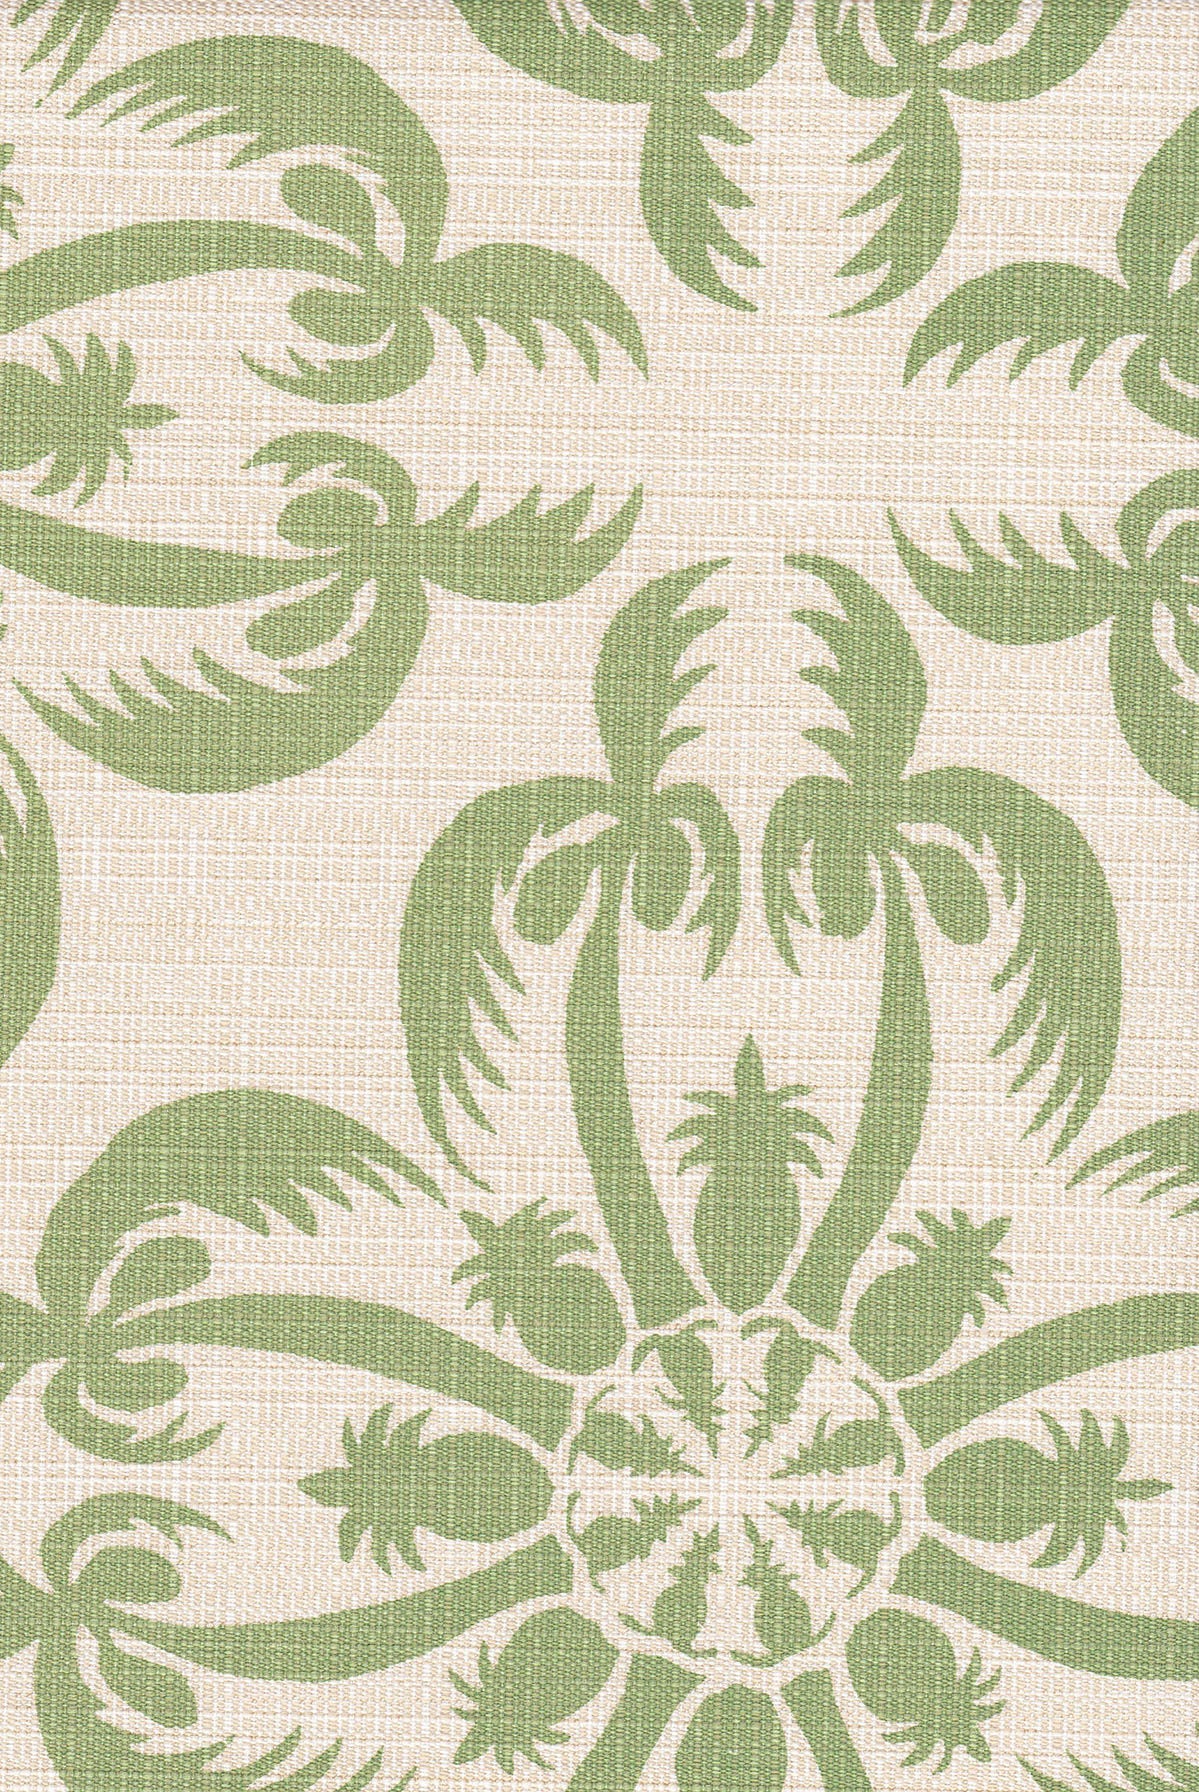 Oasis - Oasis Green on Antique Beige Acrylic